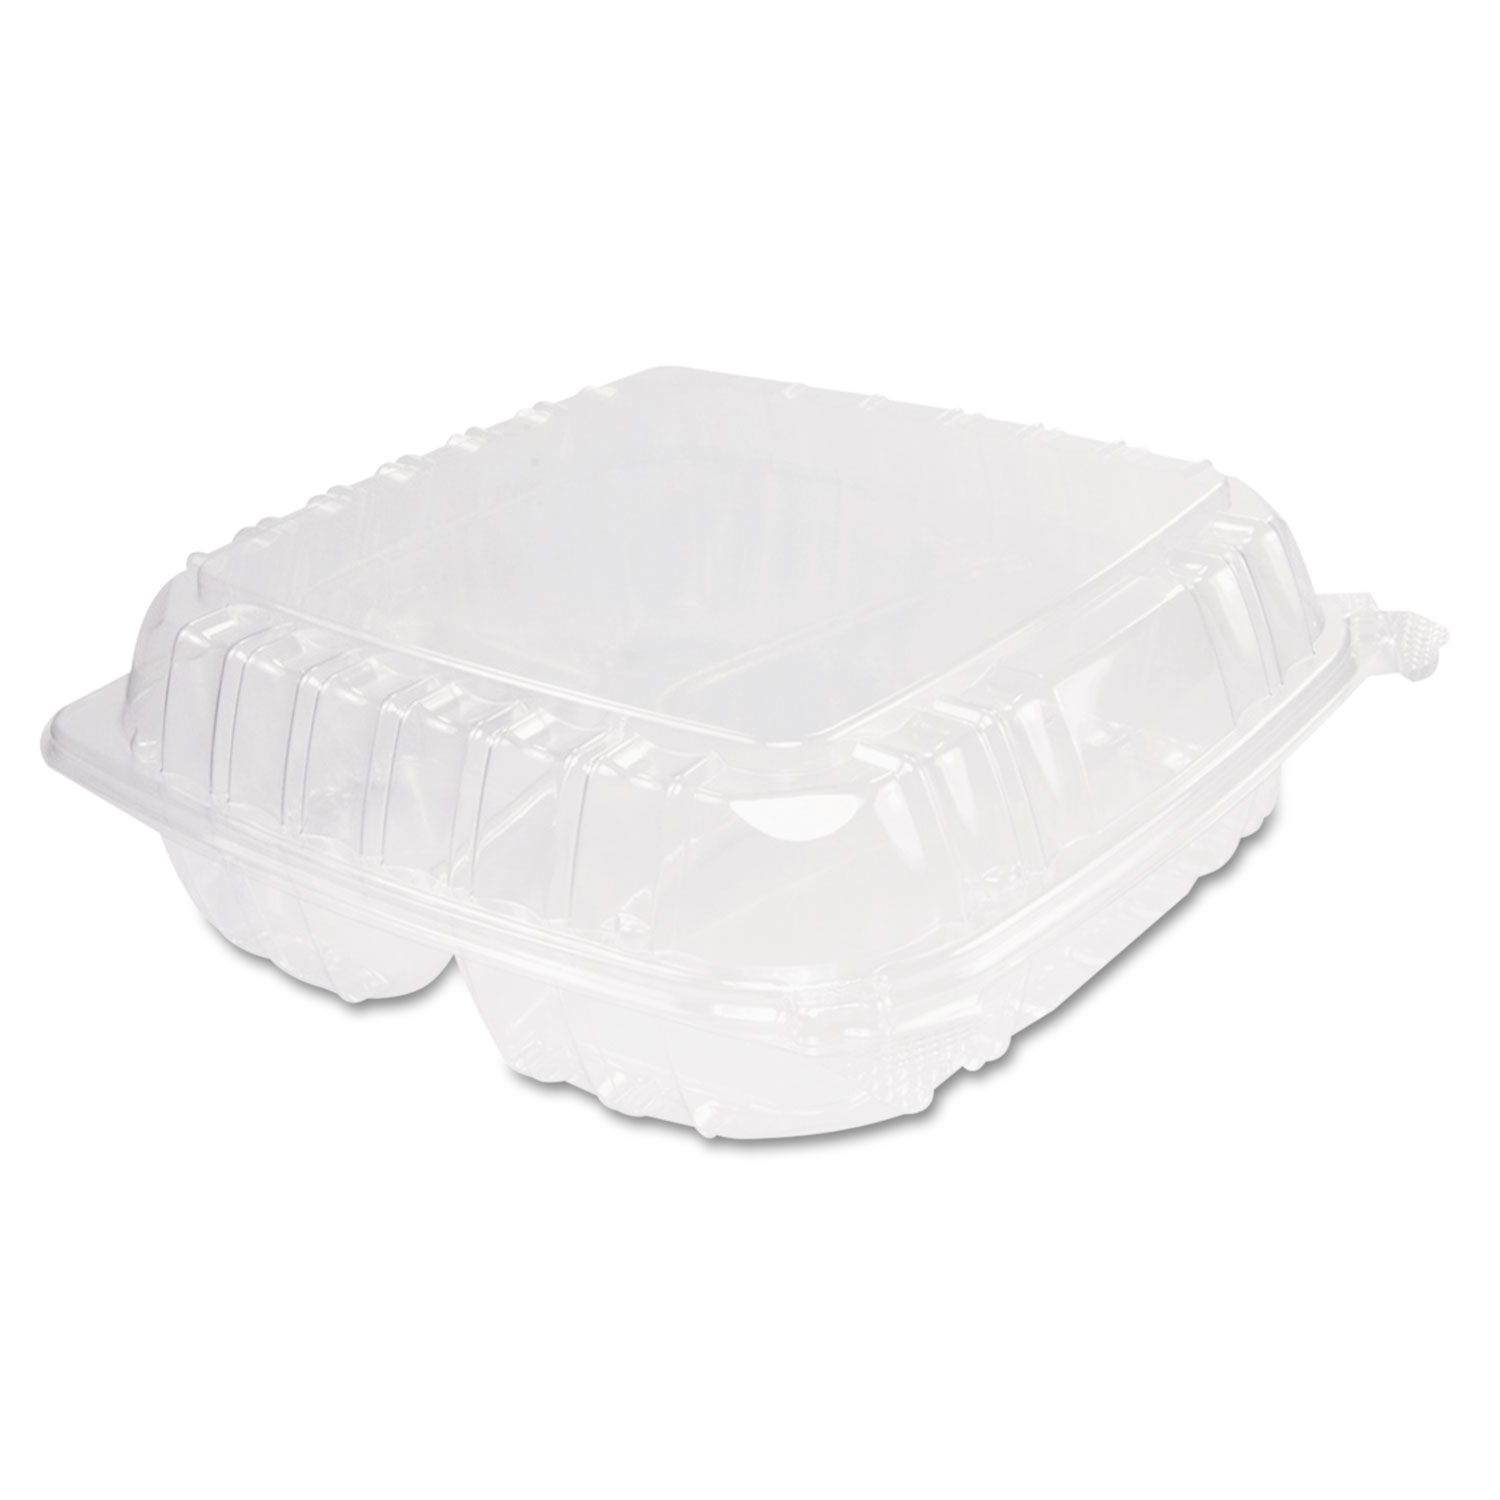  Dart C95PST3 ClearSeal Plastic Hinged Container, 3-Comp, 9 x 9-1/2 x 3, 100/Bag, 2 Bags/CT (DCCC95PST3) 